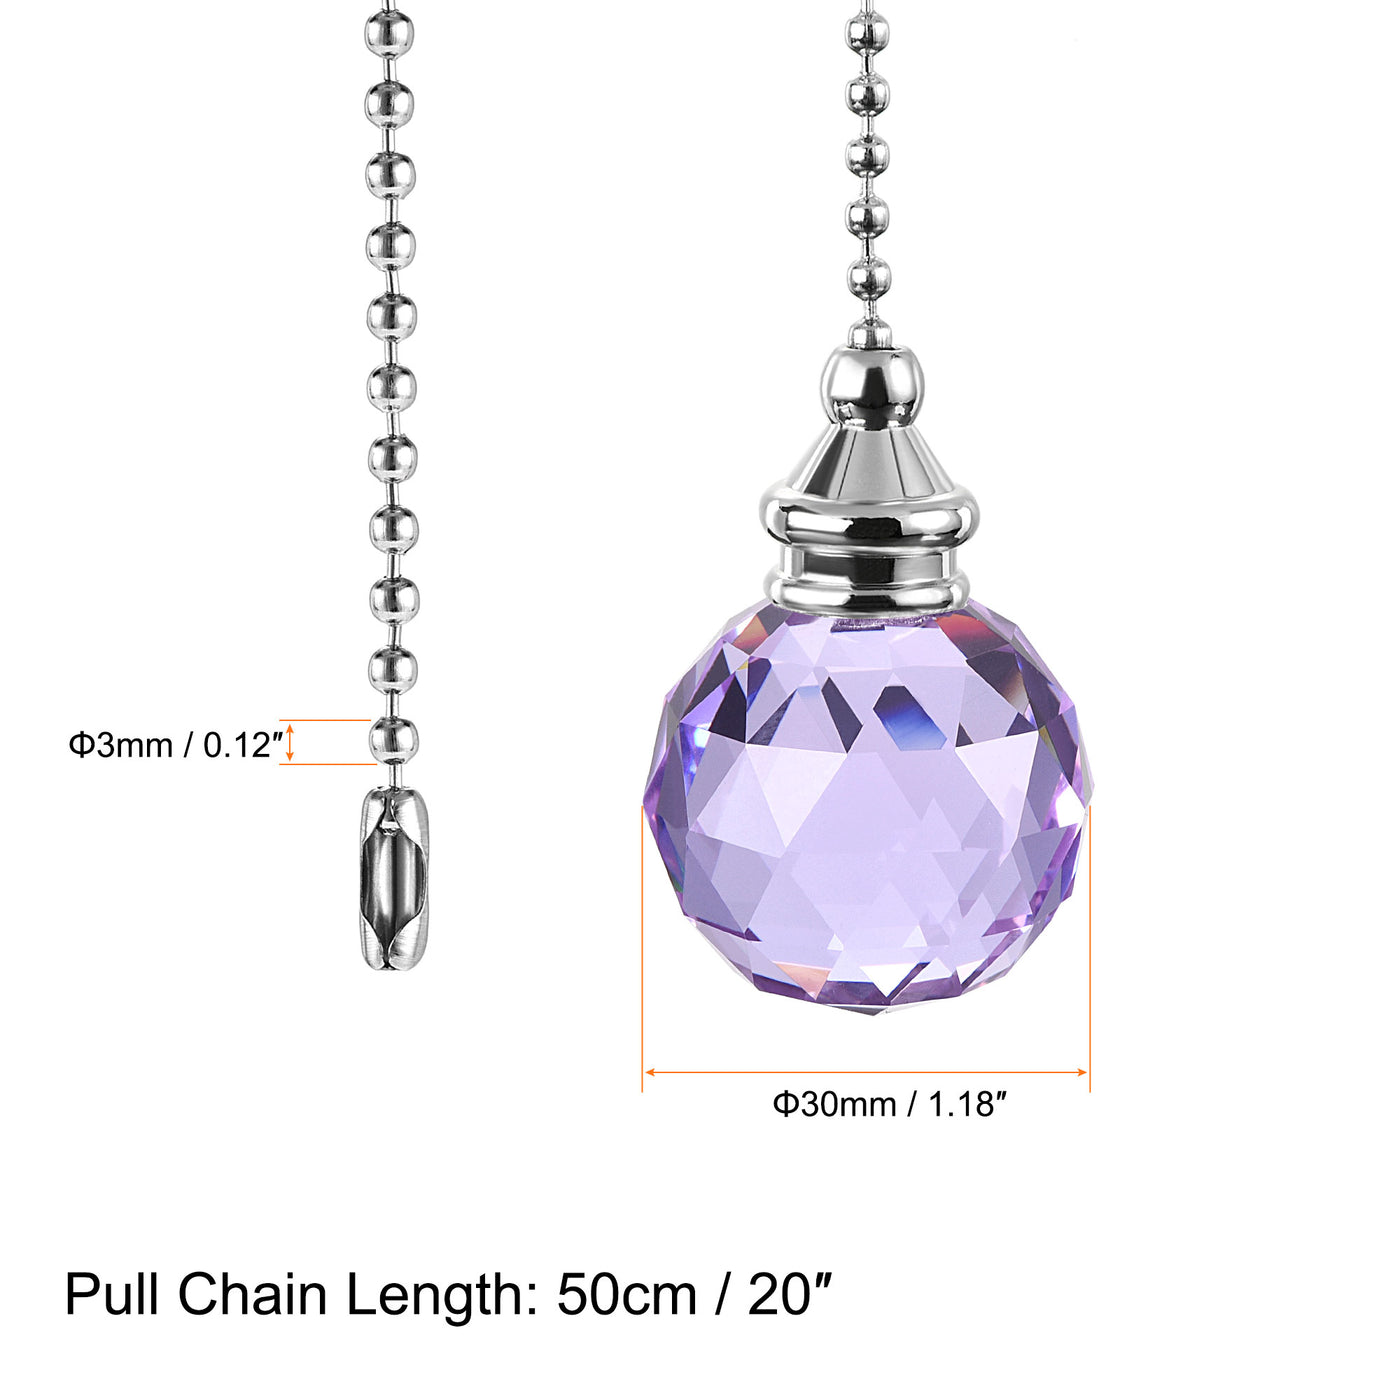 uxcell Uxcell Ceiling Fan Pull Chain, 20 Inch Nickel Finish Chain Ornament Extension, 30mm Purple Crystal Ball Pendant 2Pcs